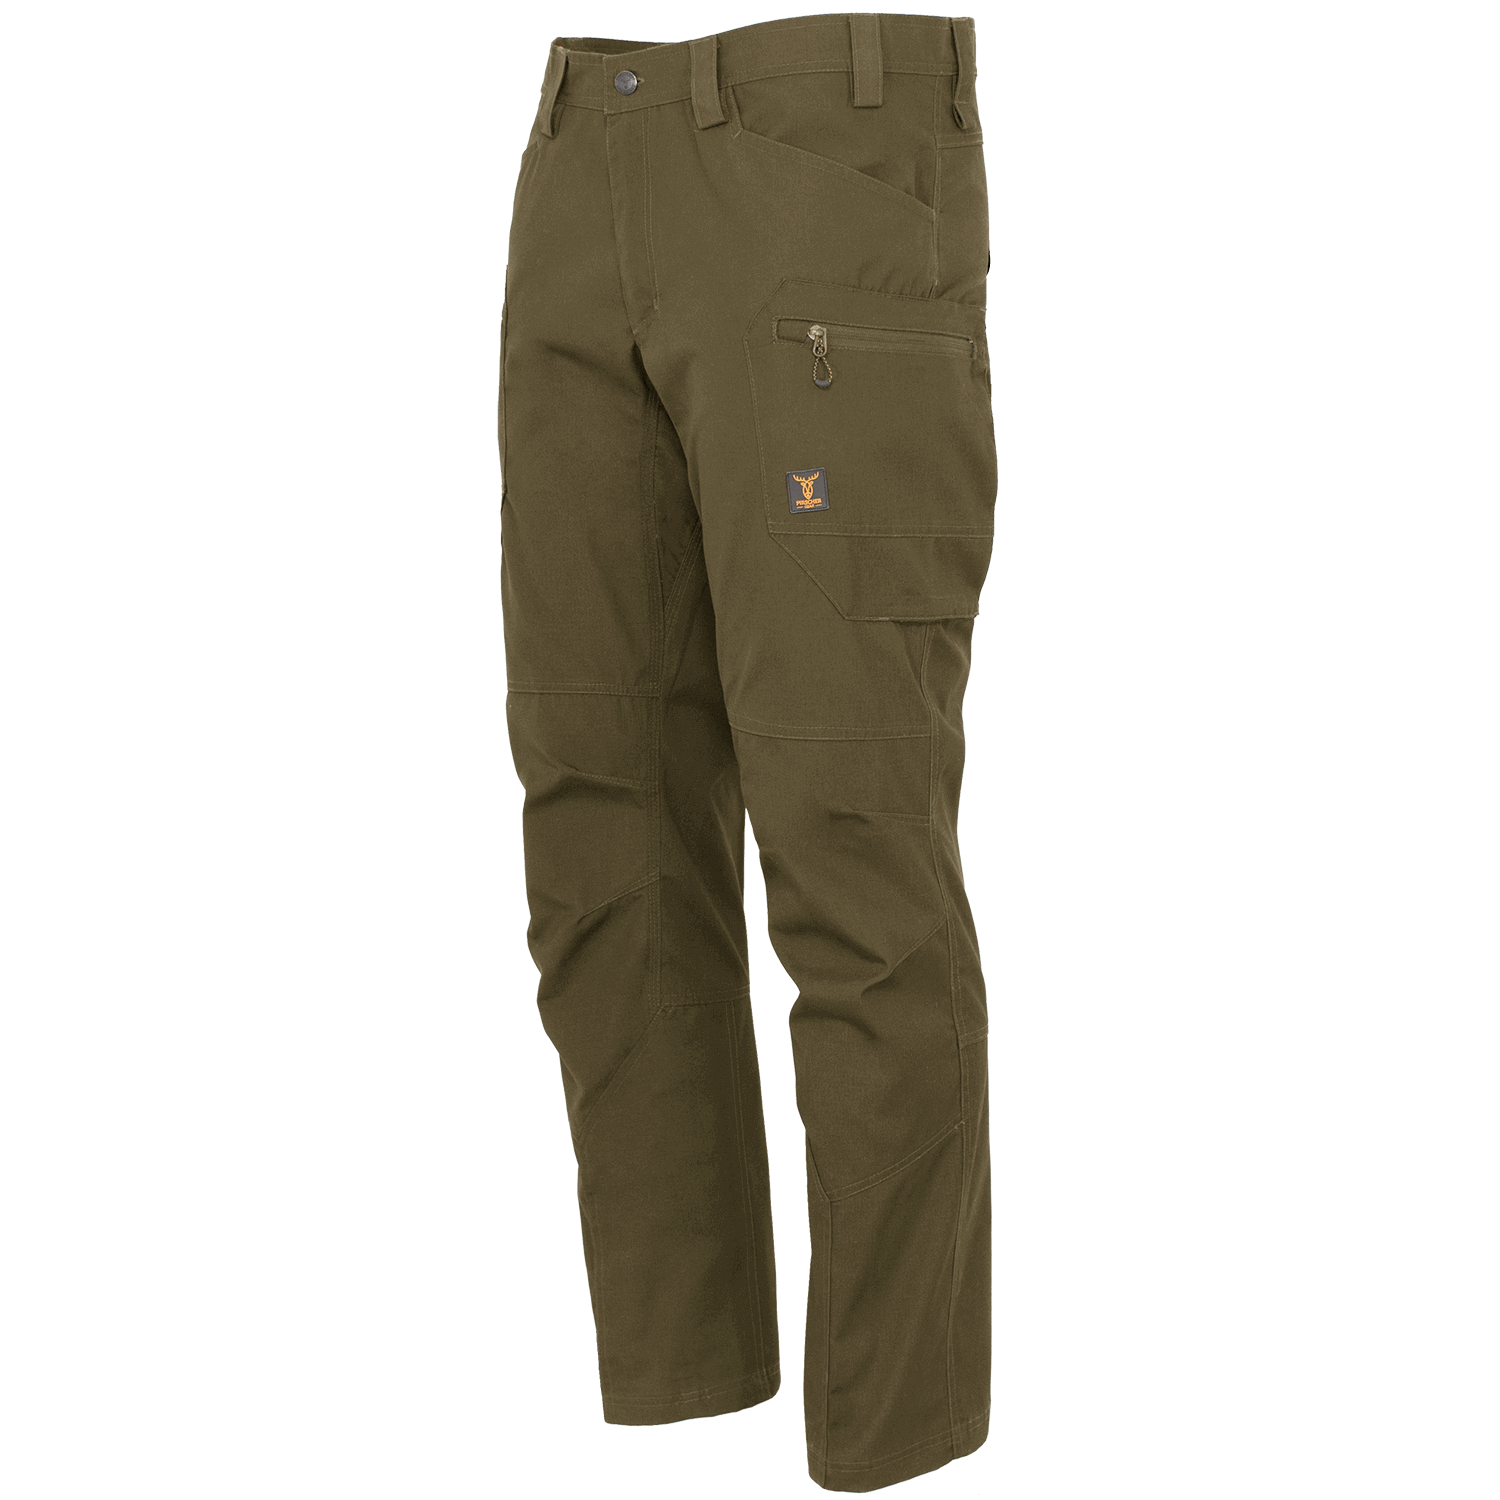 Pirscher Gear Territory Pants - Hunting Trousers